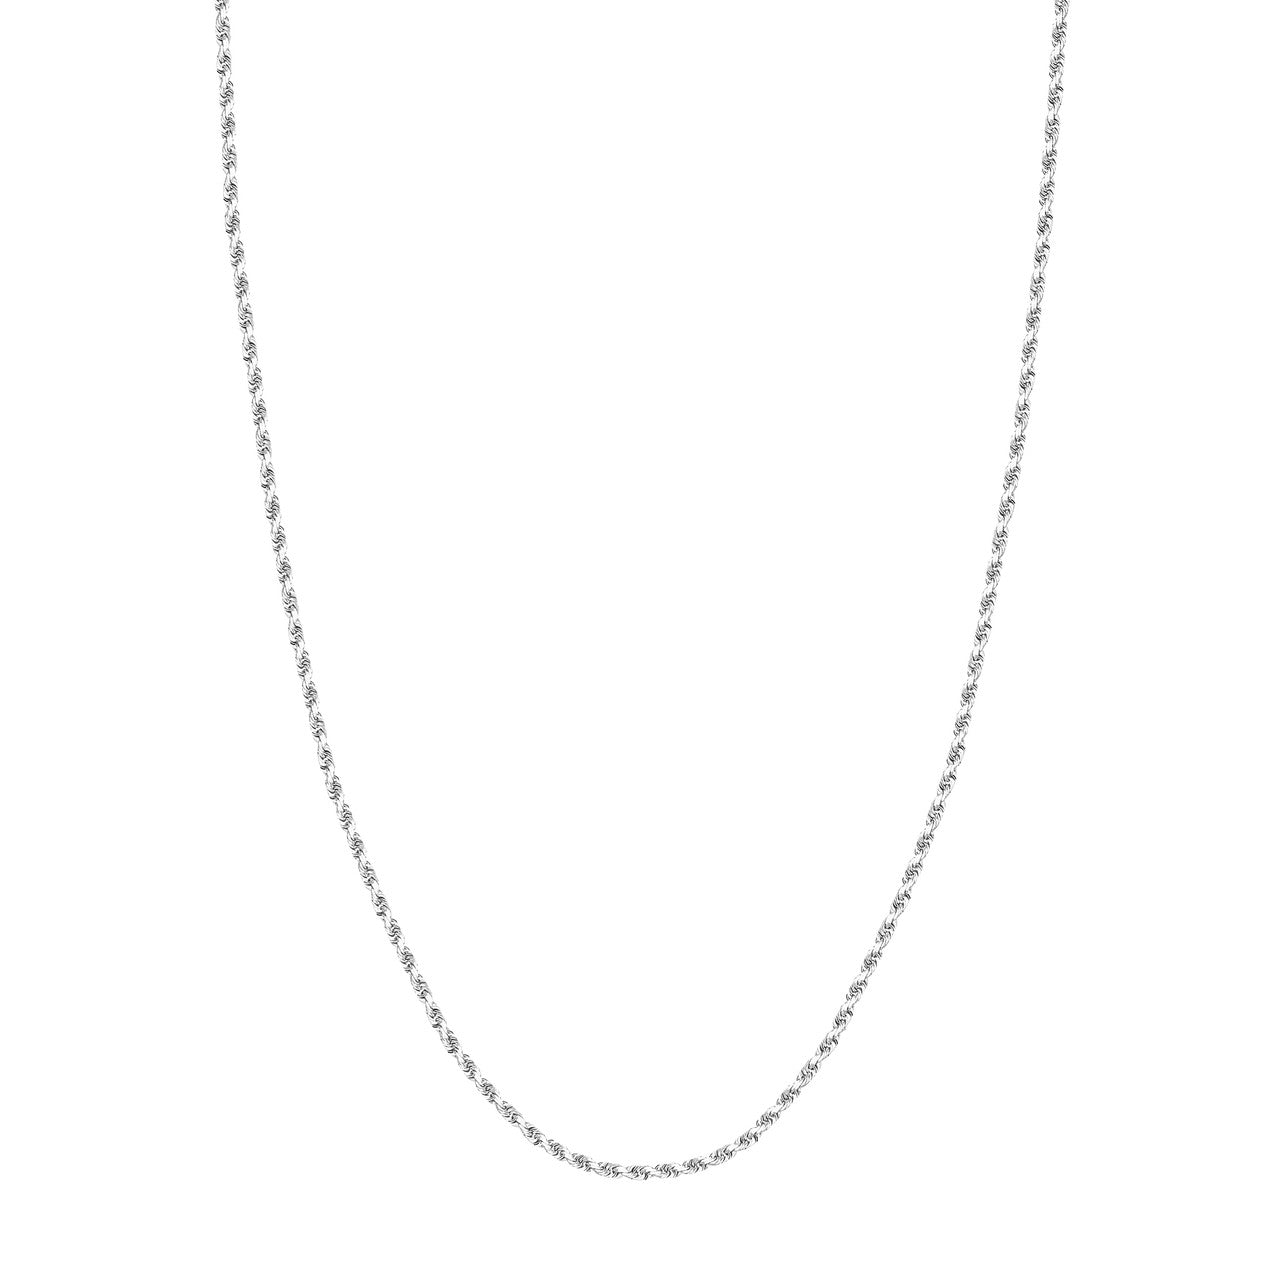 14K White Gold 2.25mm Solid Diamond Cut Rope Chain with Lobster Lock